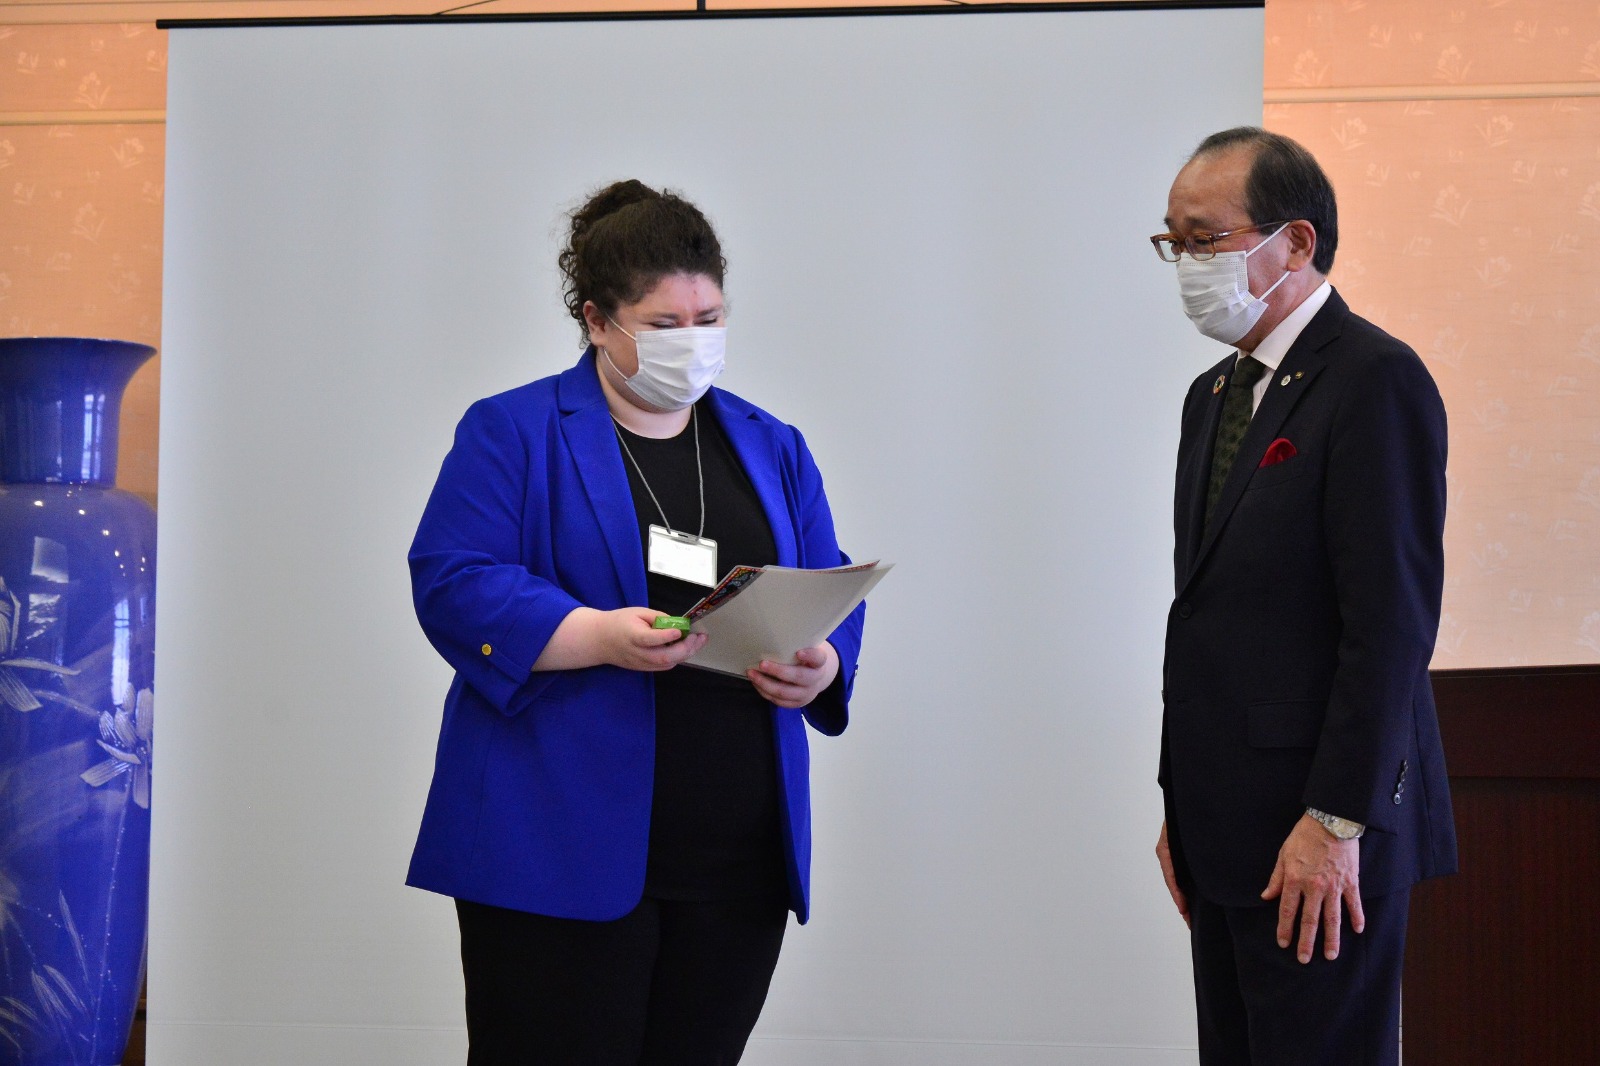 Christelle Barakat receiving a commemorative gift from Mayor Matsui, Mayor of Hiroshima City, on behalf of the group.